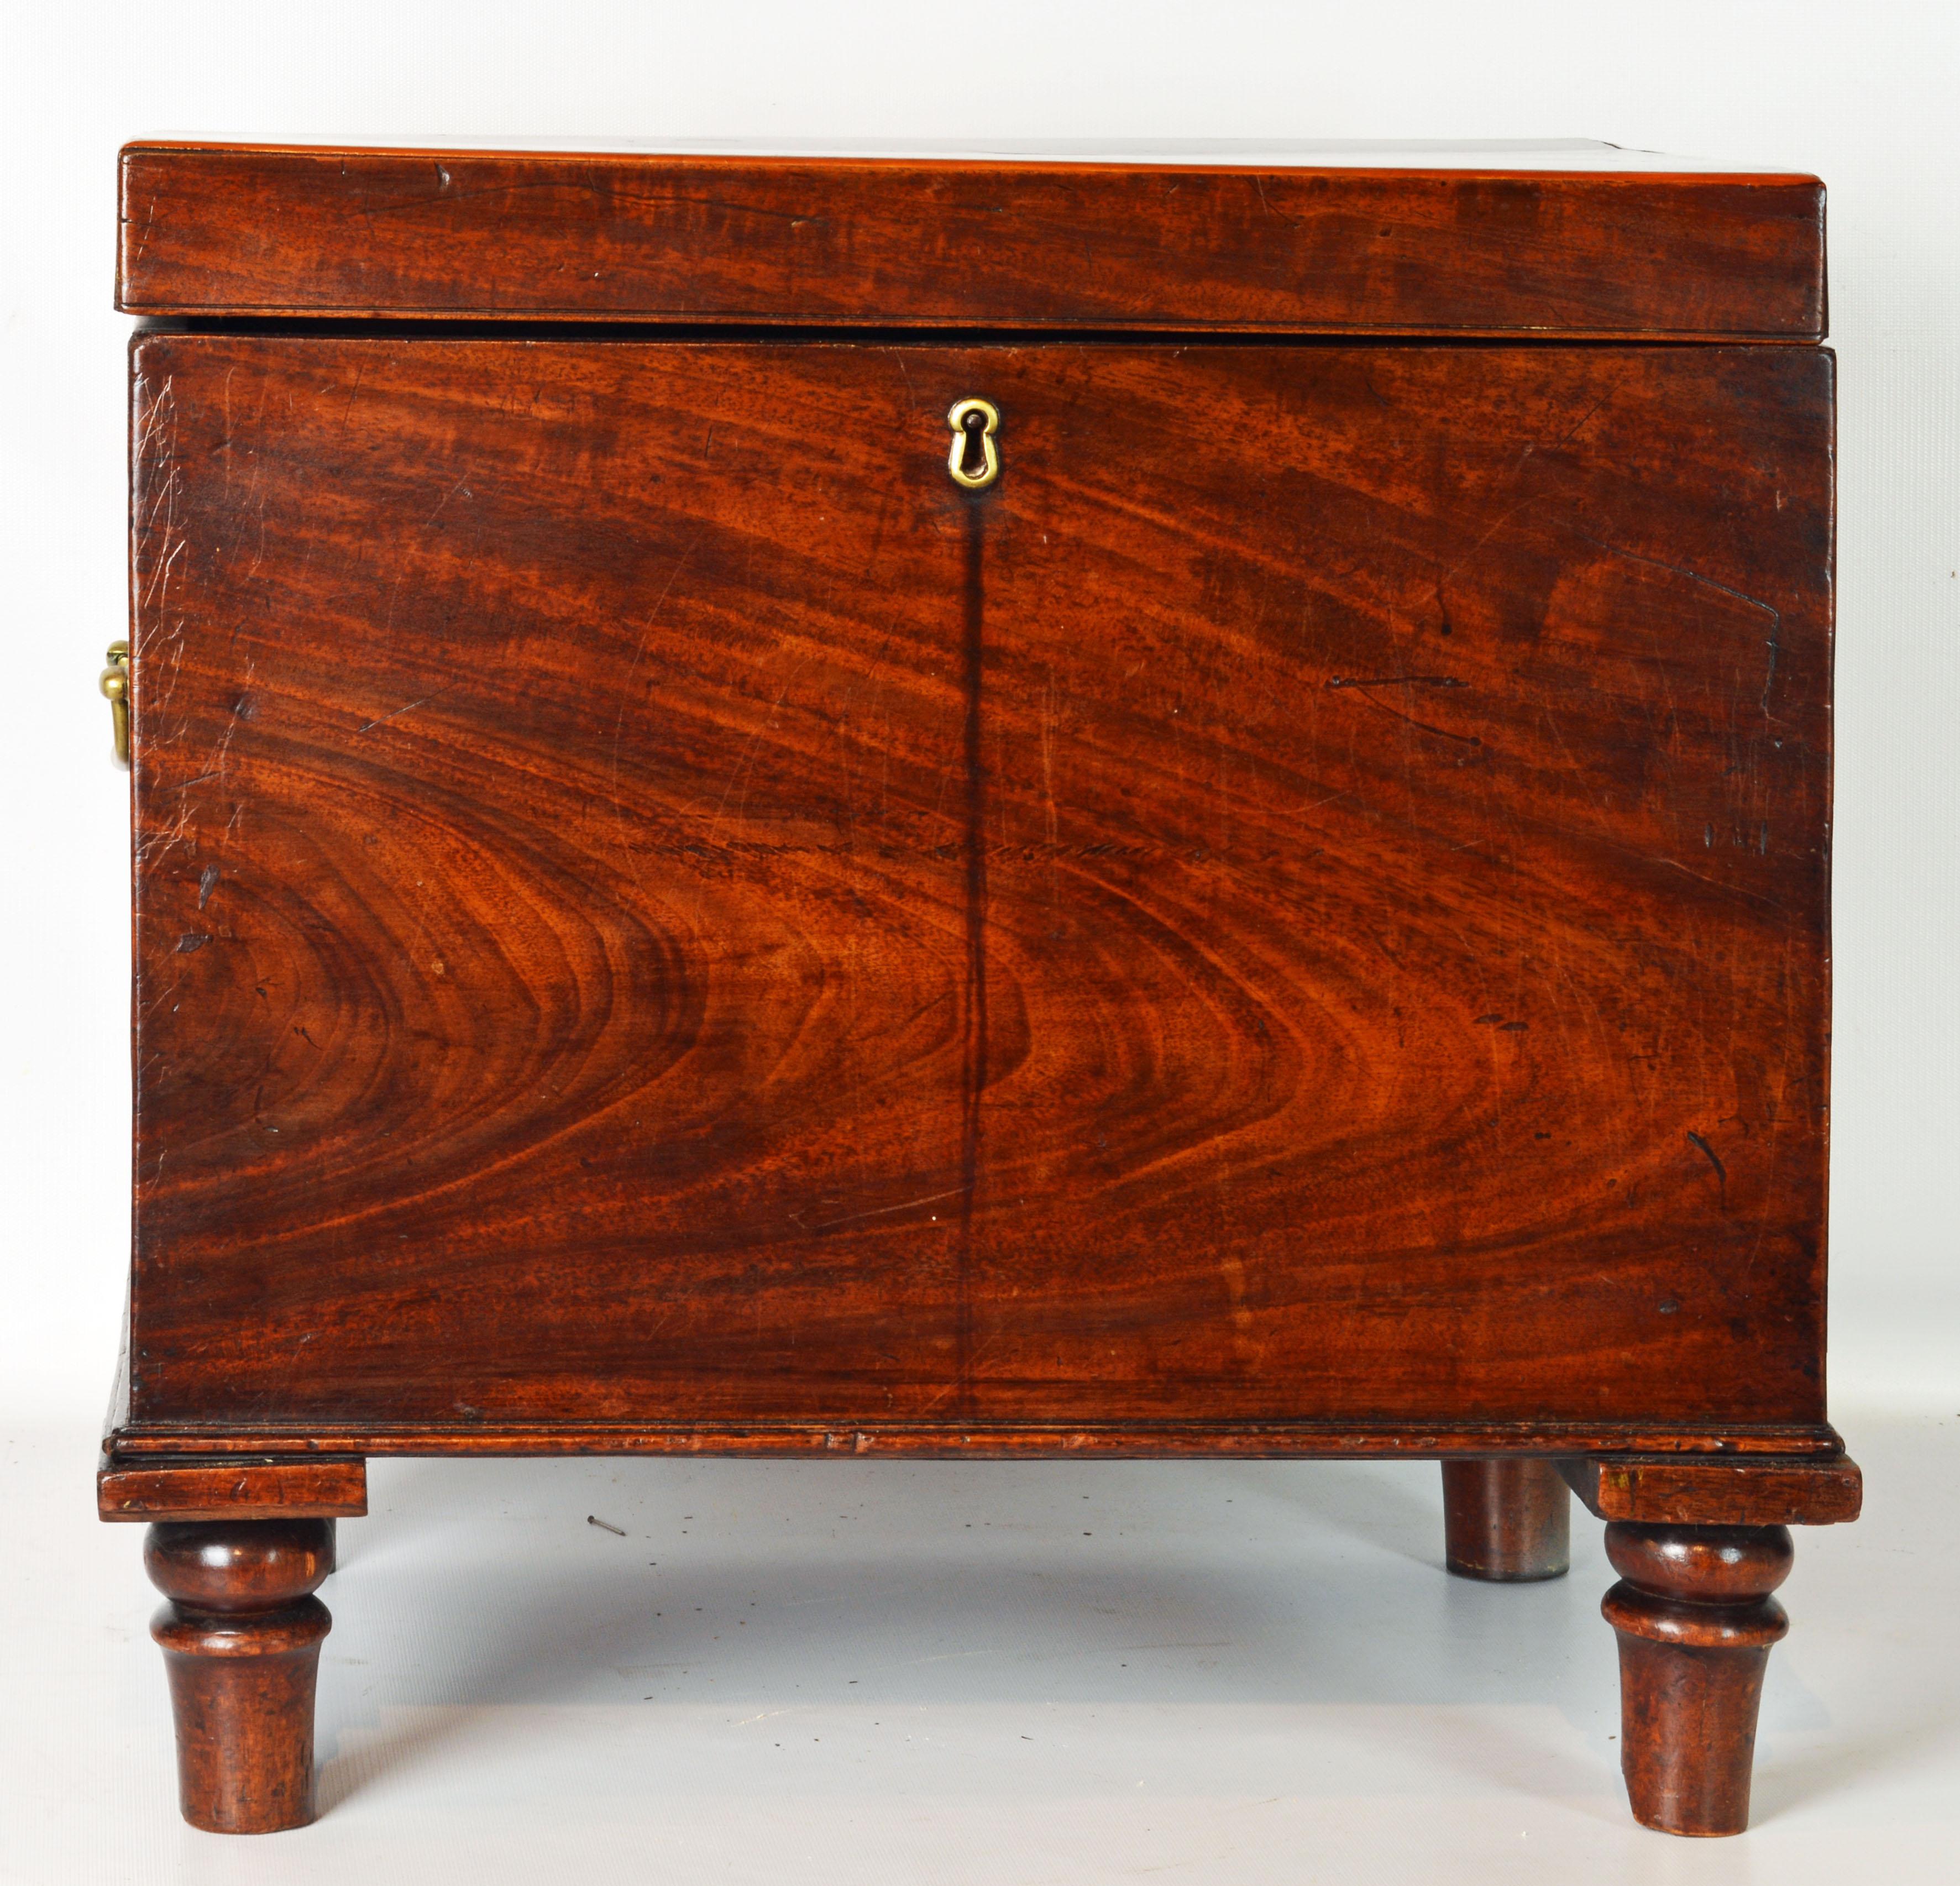 This well proportioned English regency style mahogany cellarette features a top that opens up to an interior retaining its original metal lining. The mahogany veneers are beautifully figured and of a rich warm color. Retaining its original brass